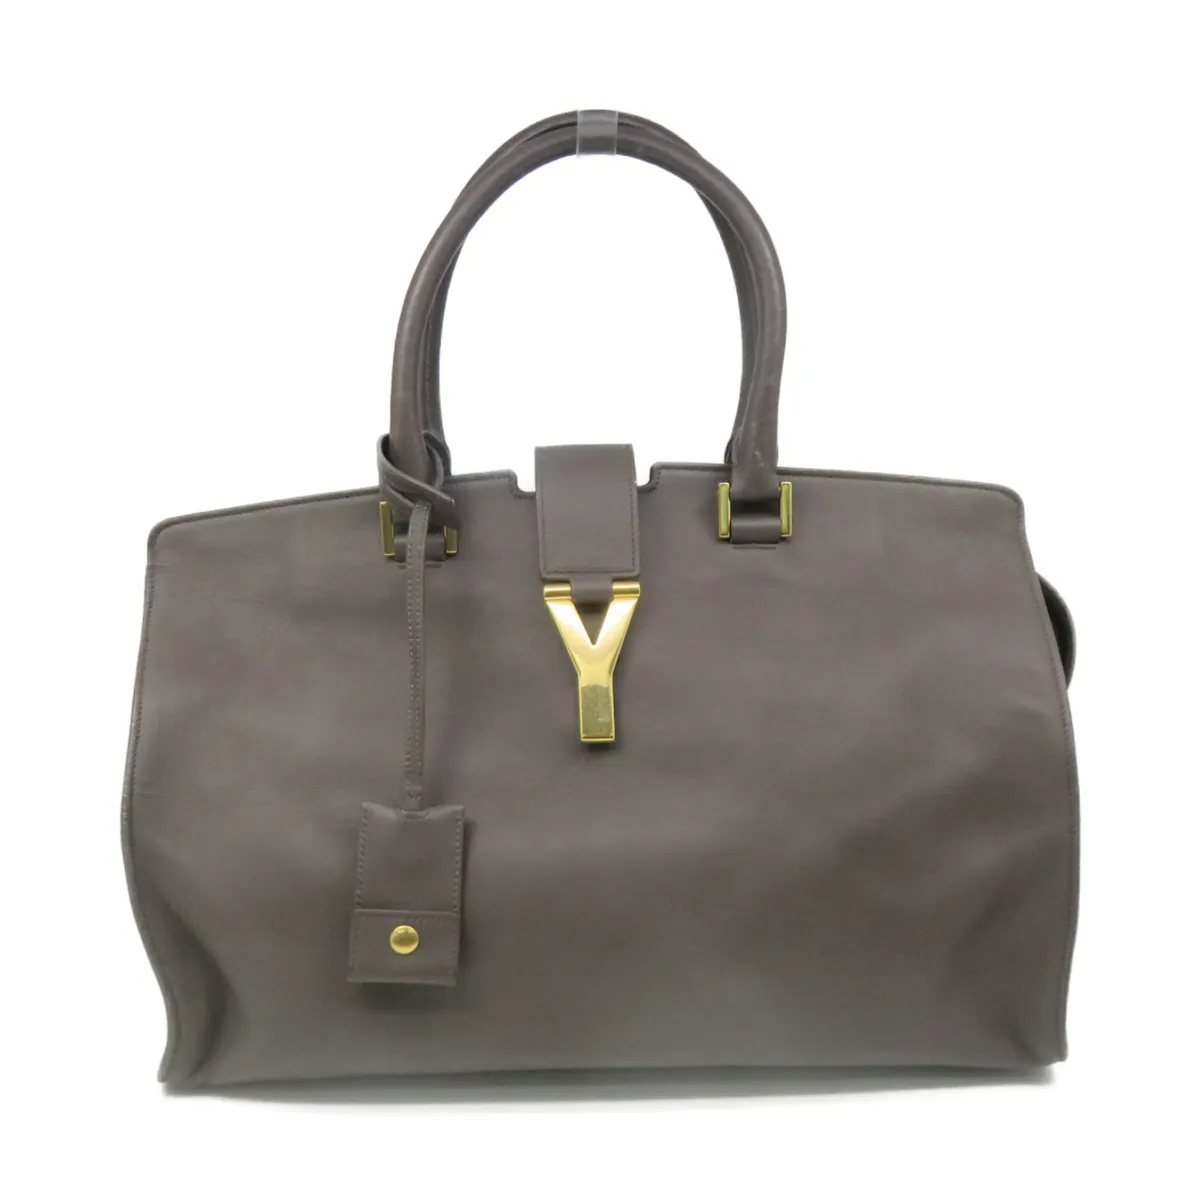 YVES SAINT LAURENT CABAS CHYC SUEDE LEATHER FLAP BAG - My Luxury